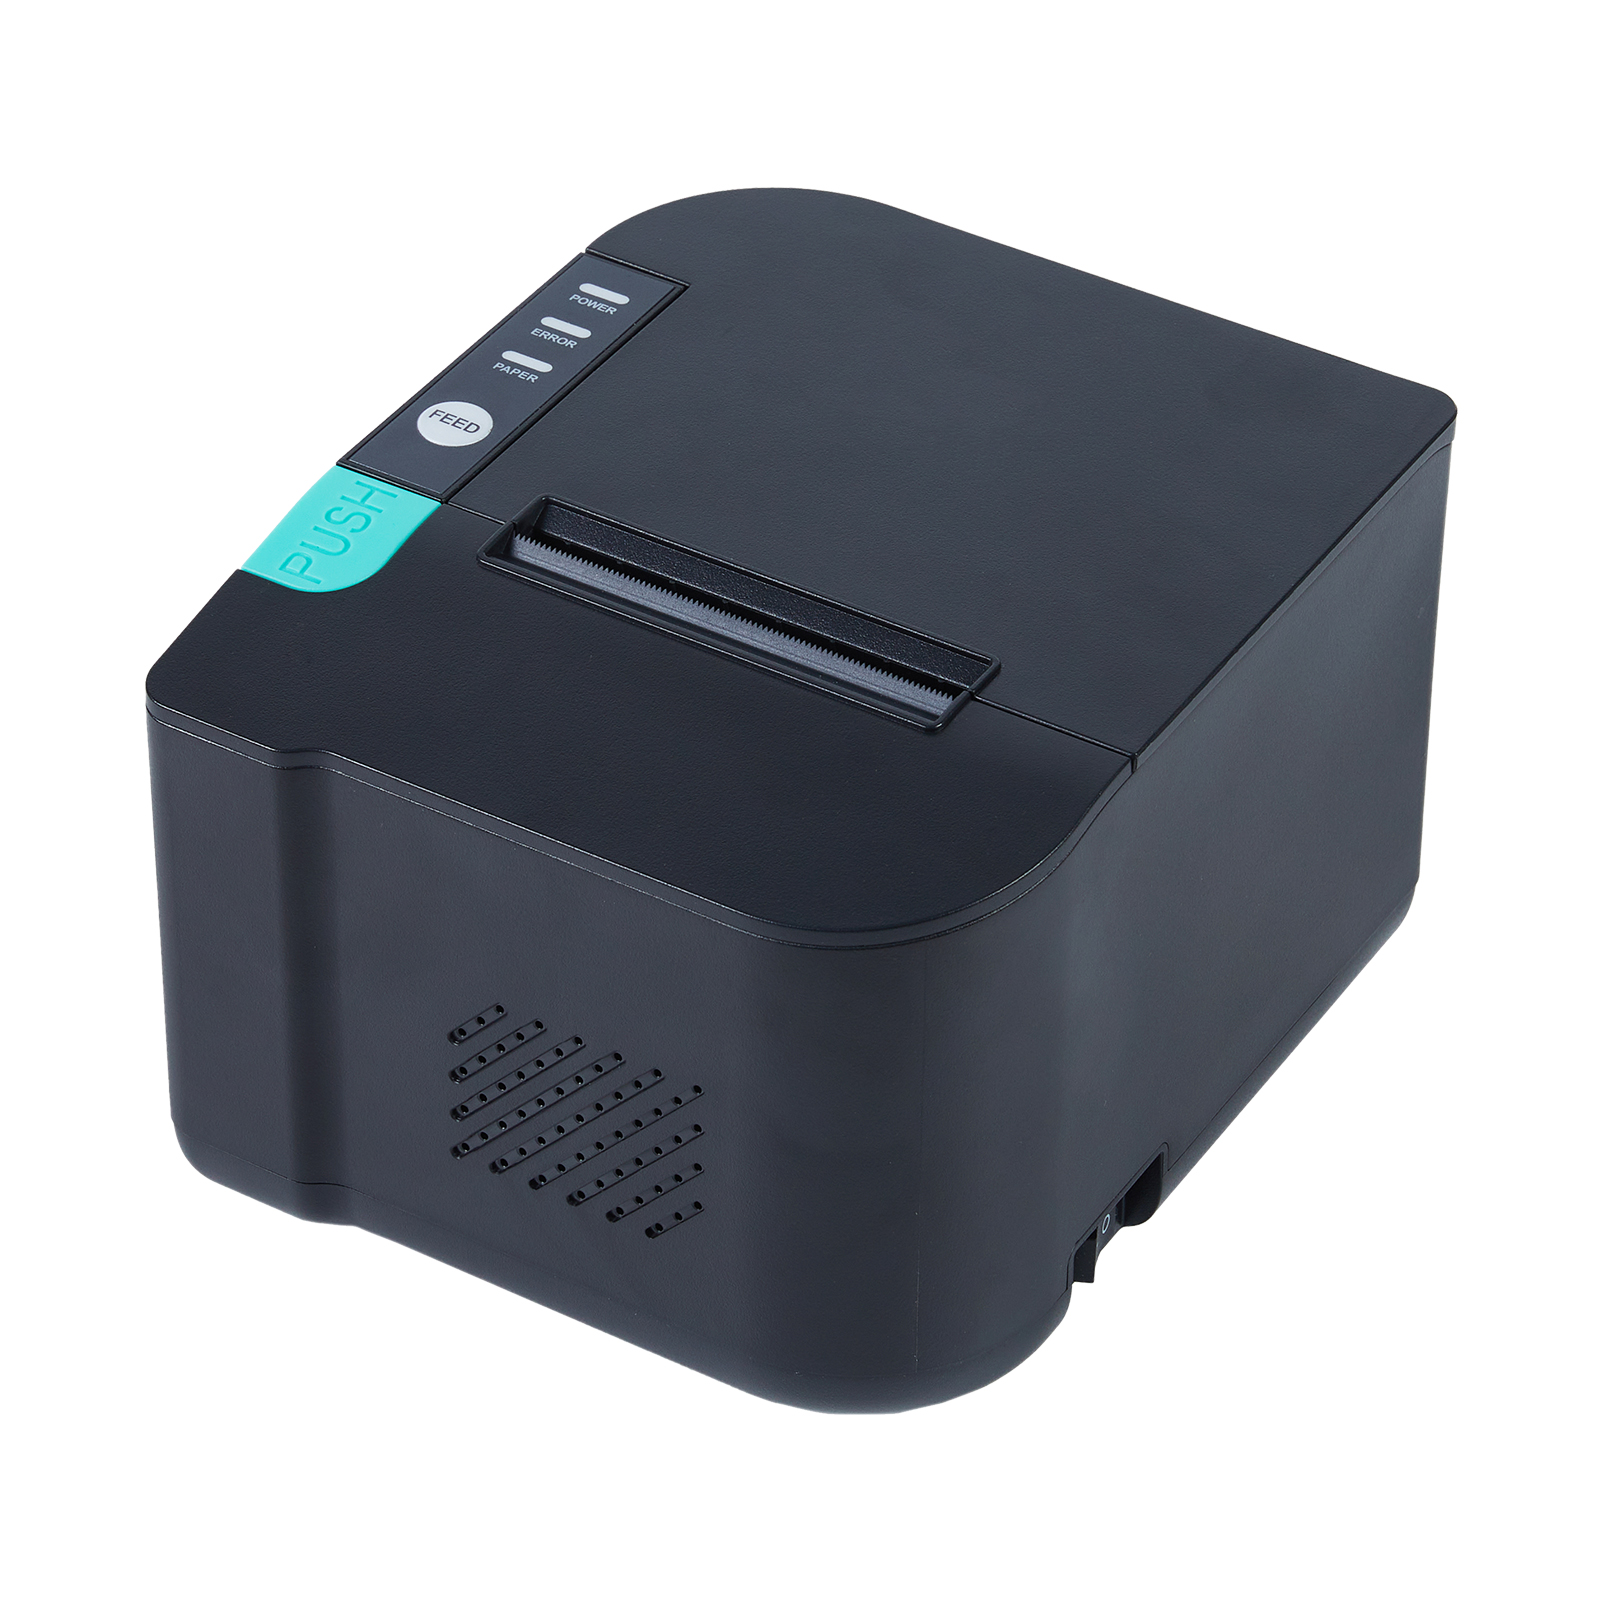 New Launched 80mm Bill Printer SP-R301 in Black